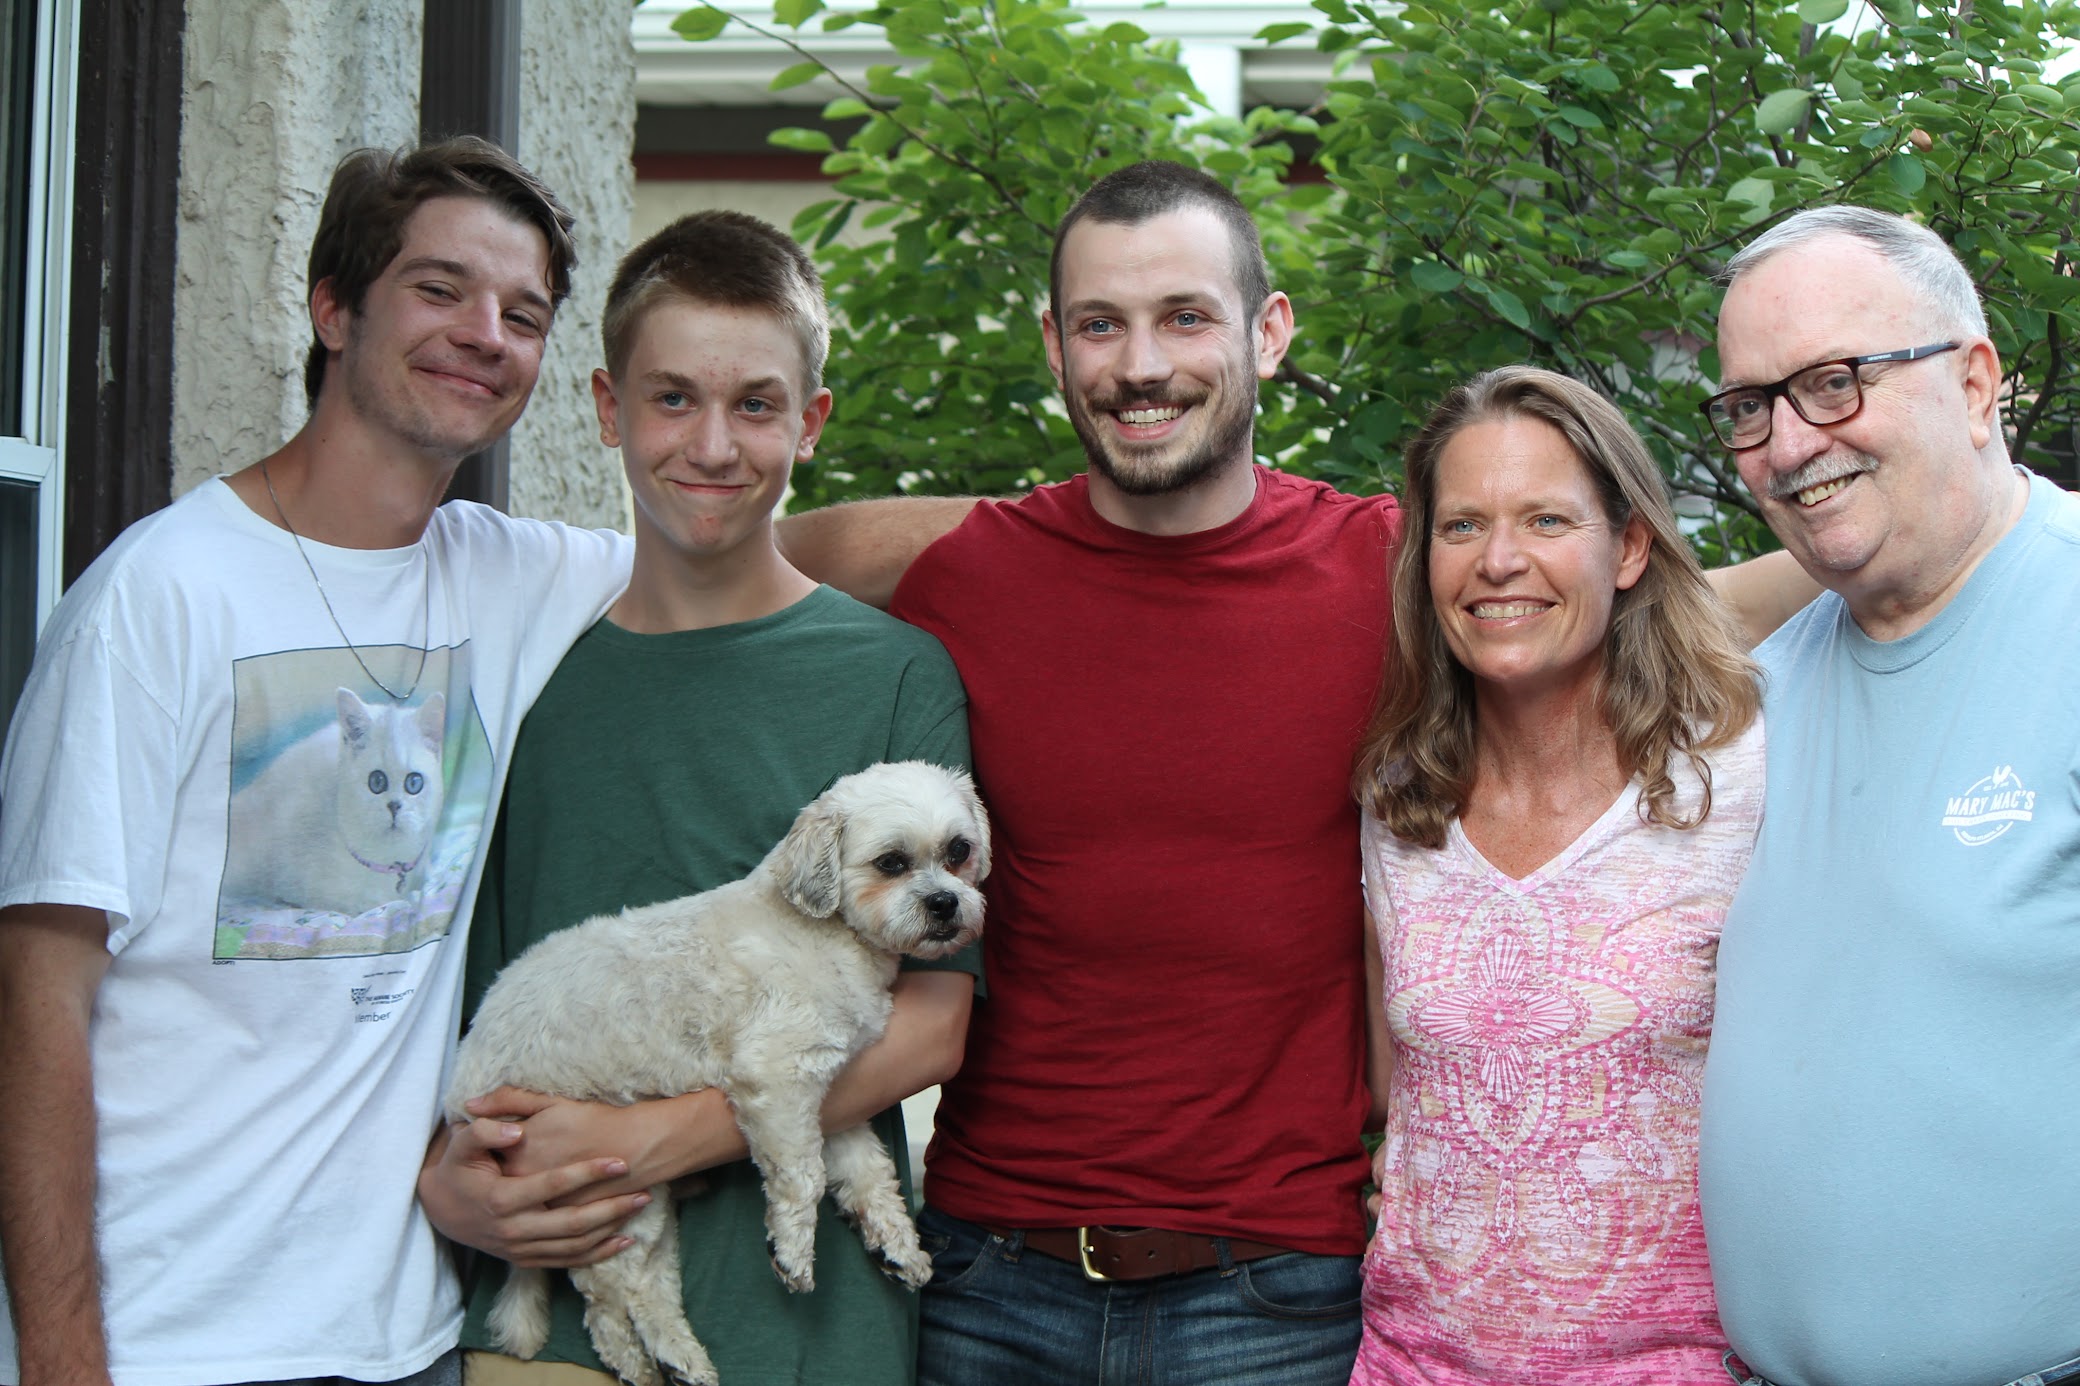 Sam, Josh, Dan, Sharon, and George Schmidt in 2018, two months prior to George's death. George founded Substance in 1975. Sharon is a teacher at Steinmetz High School, and Sam is a CPS social work intern.